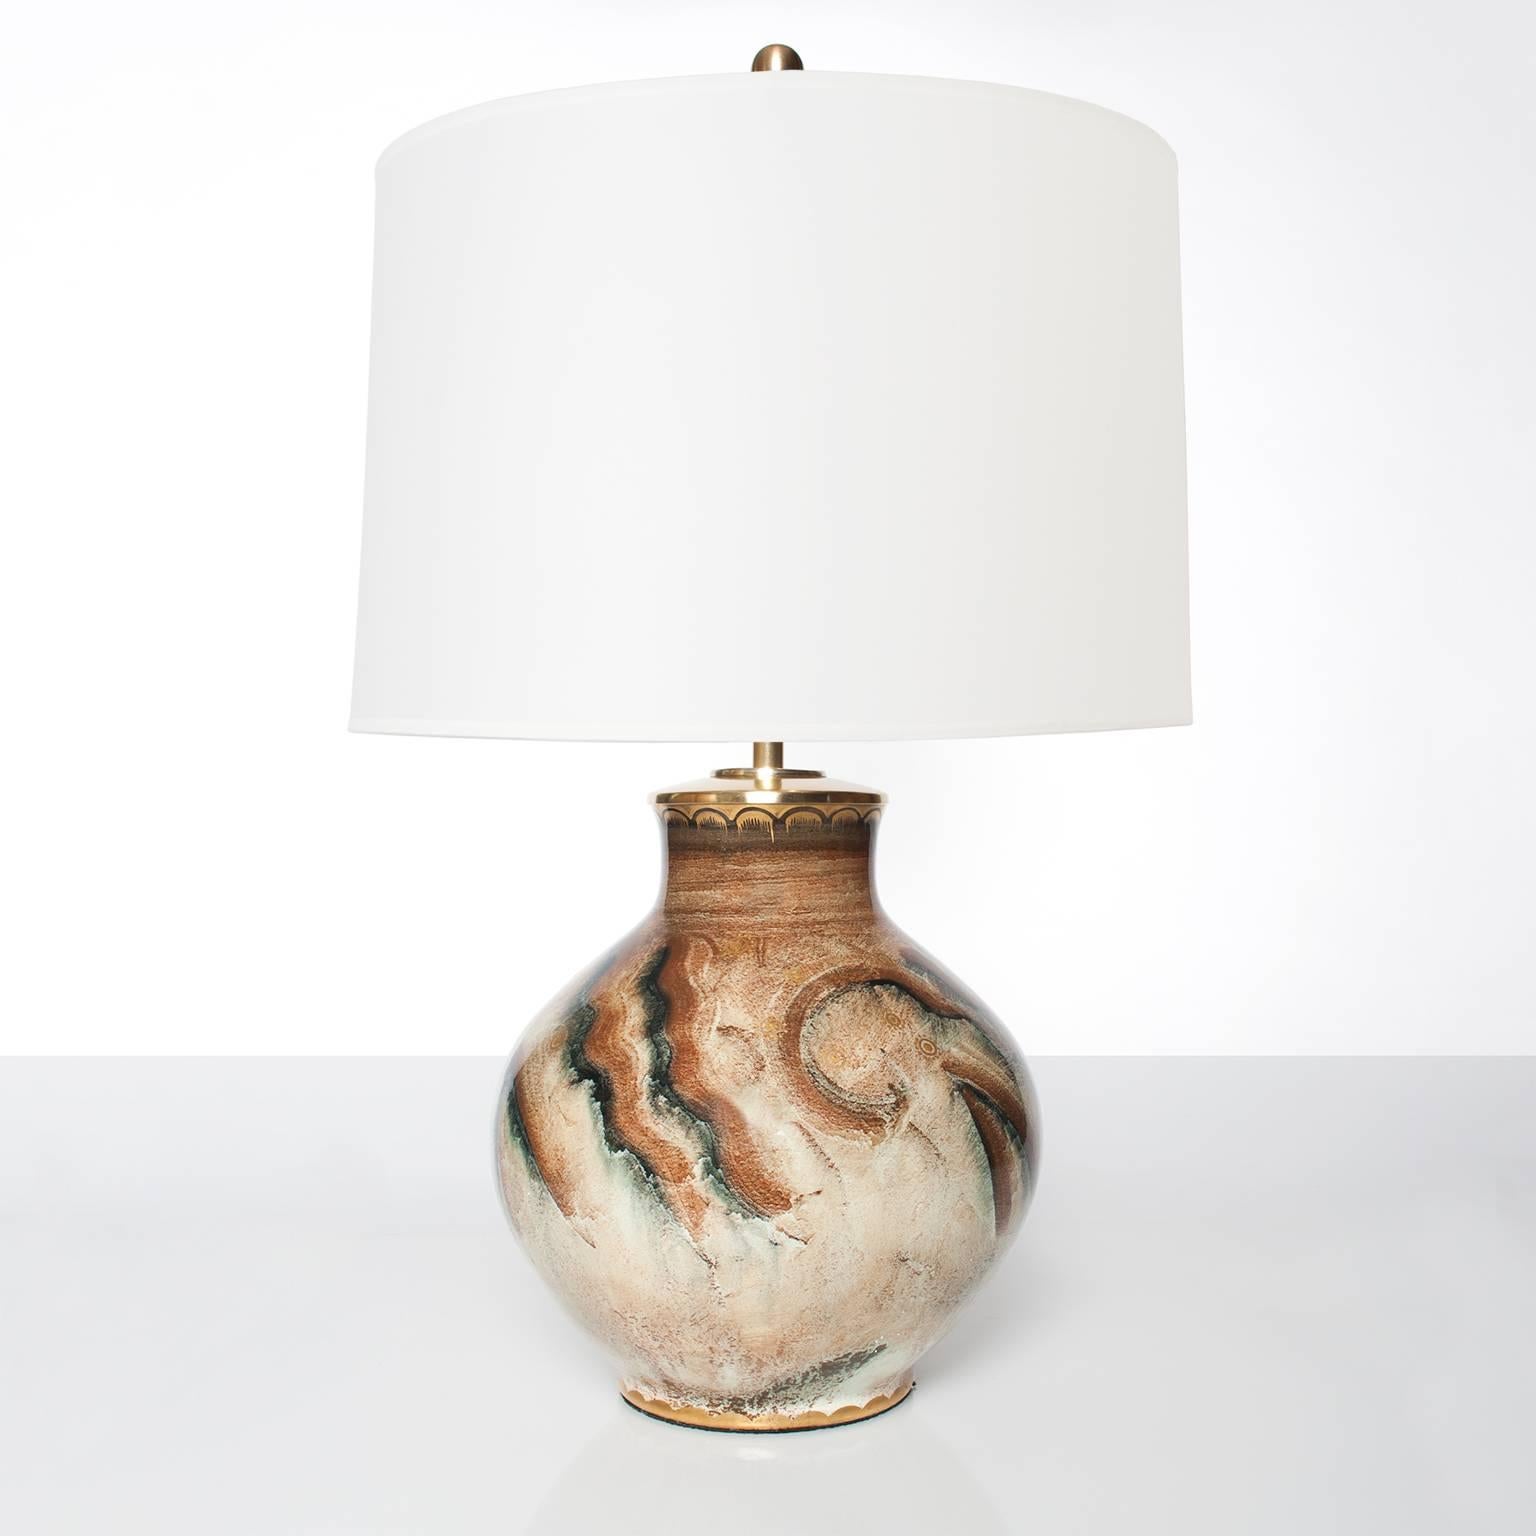 Scandinavian Modern, Swedish art deco ceramic table lamp with hand decoration with a luster glaze and detailed in gold. Made at Gustavsberg circa 1930. Hardware in polished brass, newly electrified with polished and lacquered brass double socket